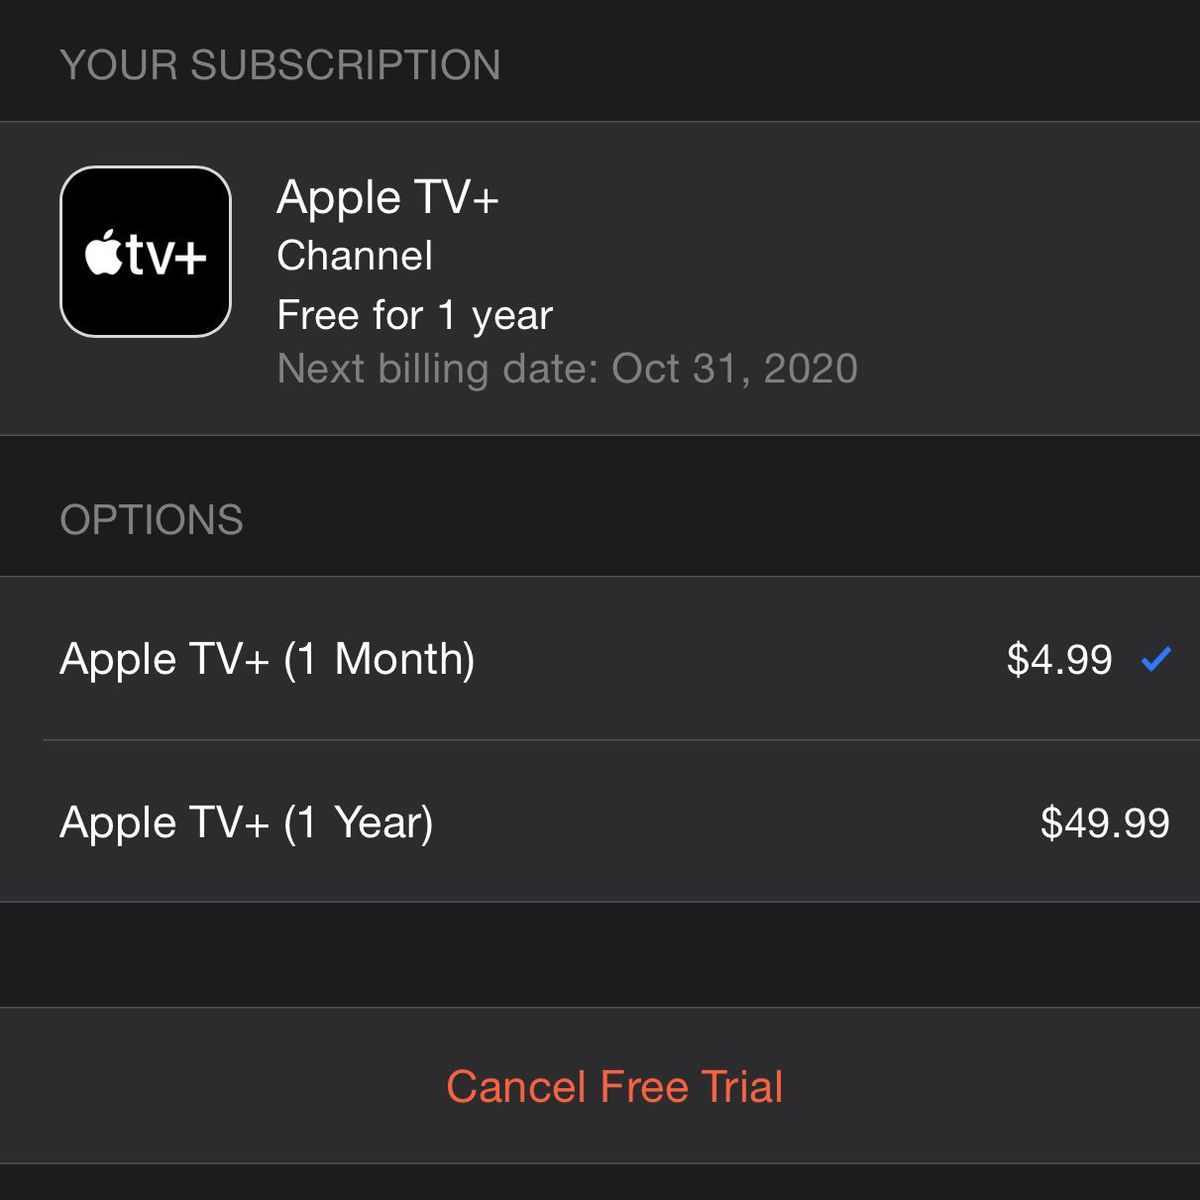 Apple TV+ Launches With New $49.99 Annual Subscription Option, Save $10 Per - MacRumors